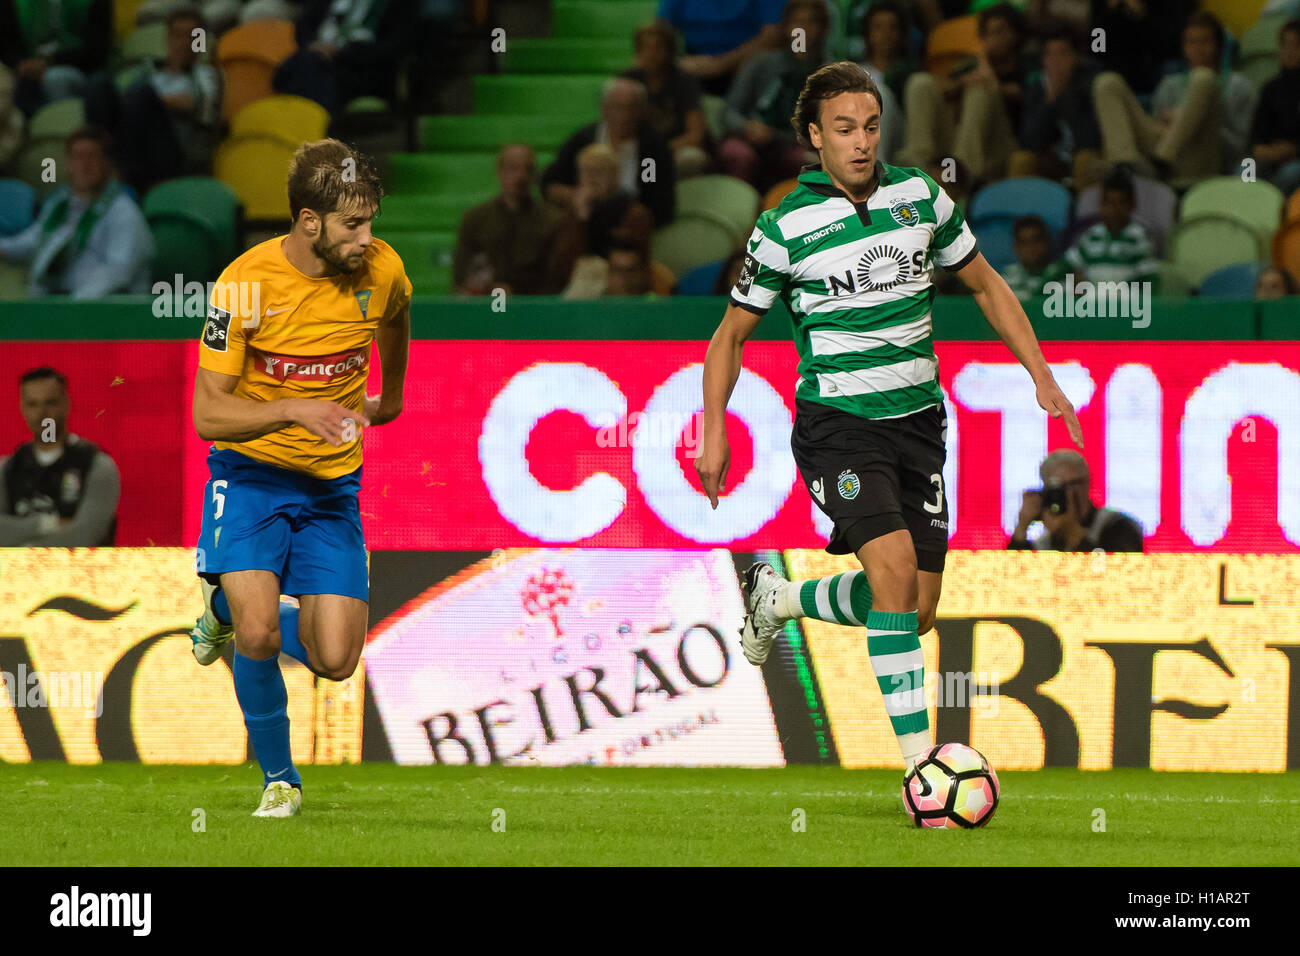 Portugal, Lisbon, Sep. 23, 2016 - PORTUGUESE FOOTBALL - Markovic in action during Portuguese First League match between Sporting and Estoril at Alvalade XXI Stadium, in Lisbon, Portugal. Credit:  Bruno de Carvalho/Alamy Live News Stock Photo